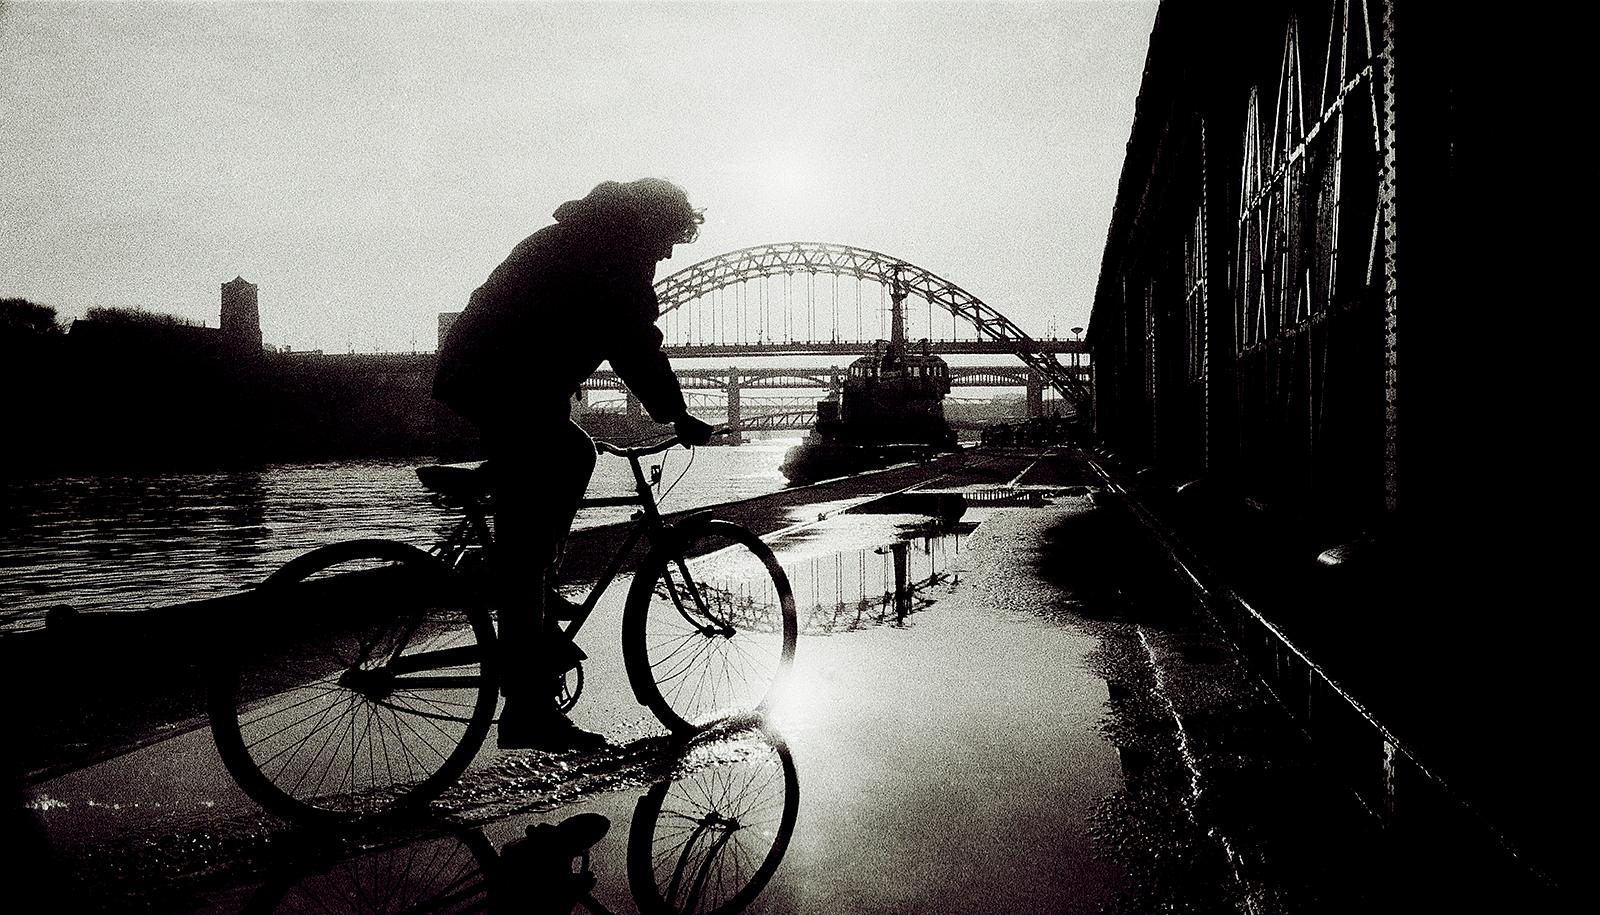 Newcastle - Signed limited edition fine art print, black and white photography